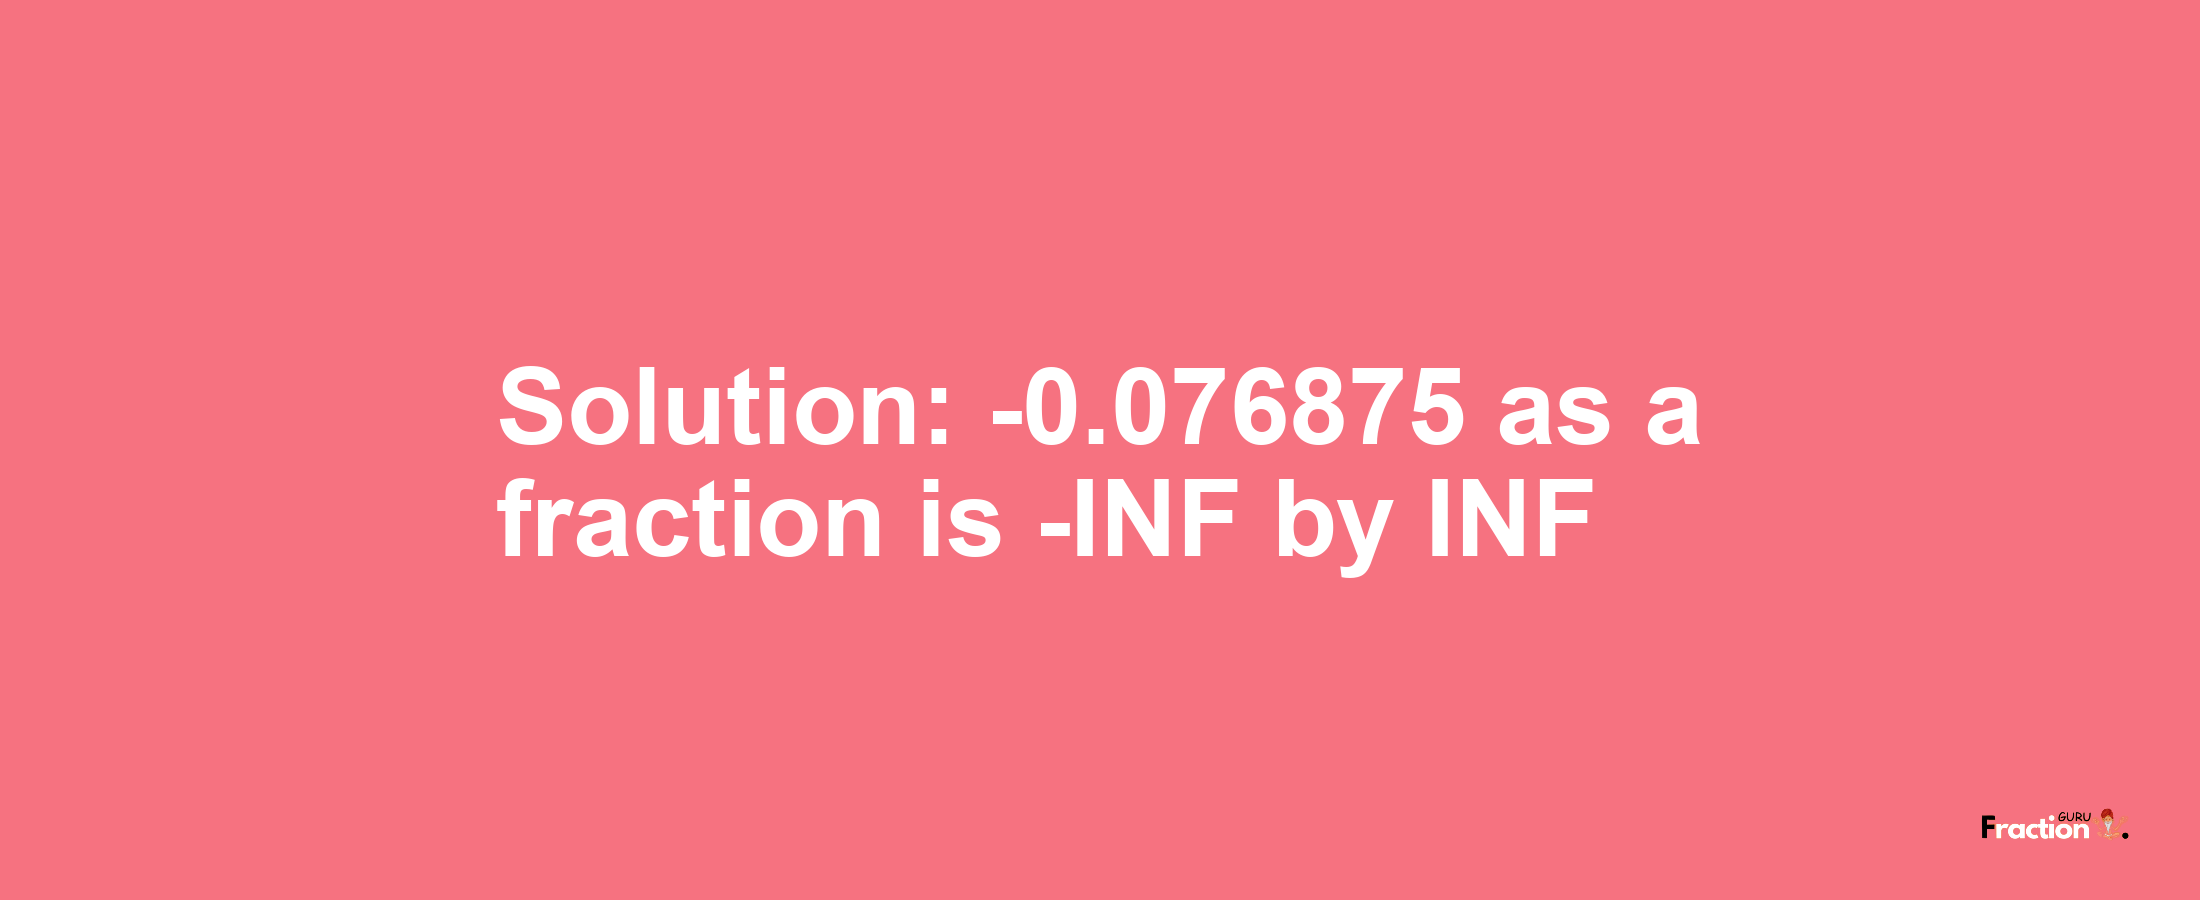 Solution:-0.076875 as a fraction is -INF/INF